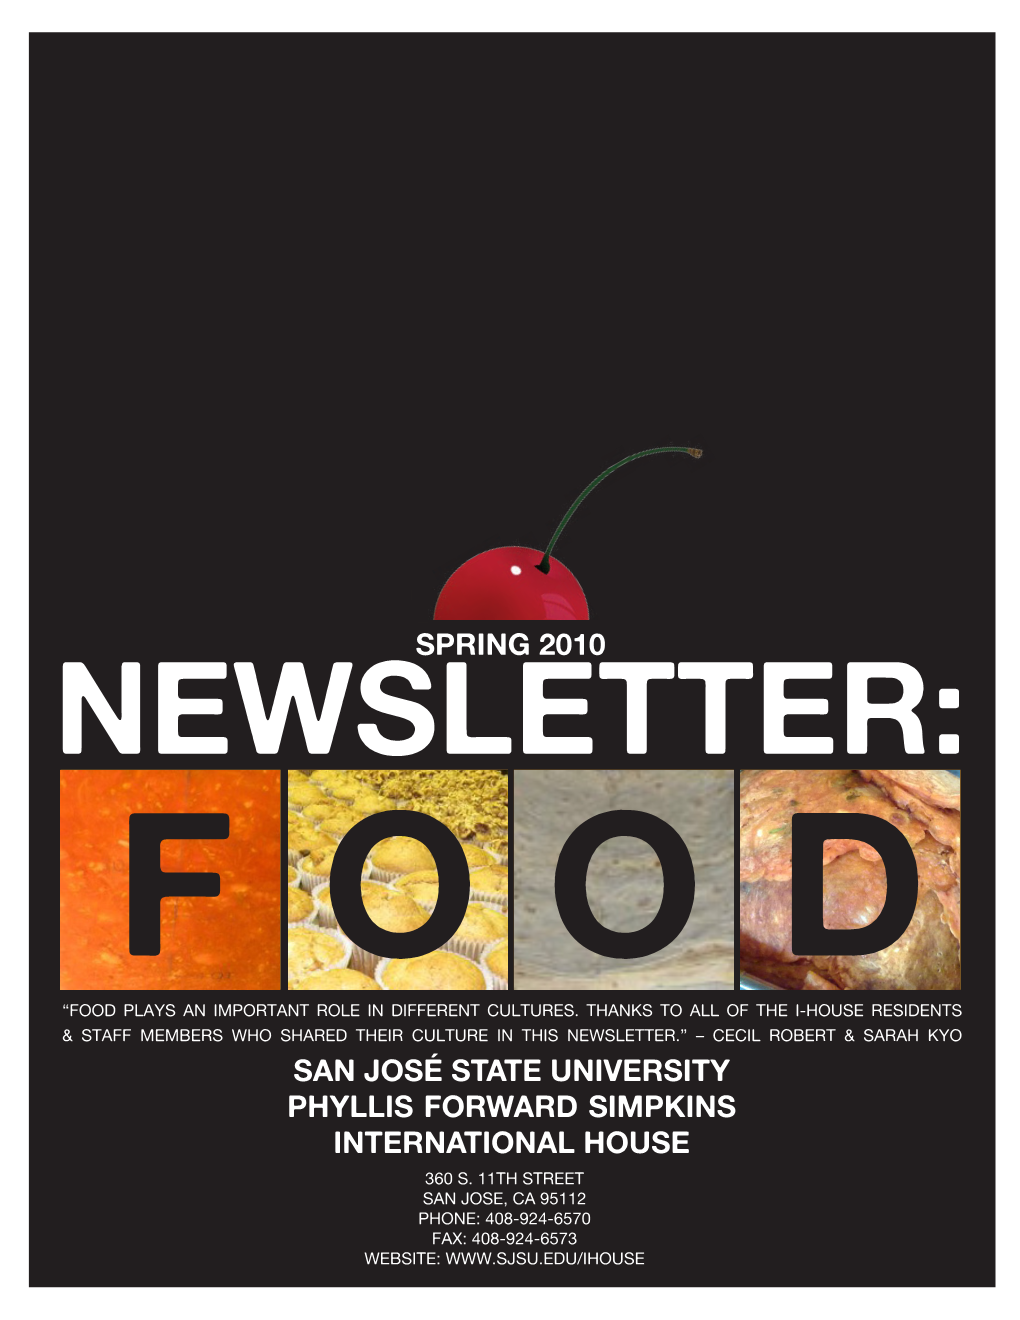 Spring 2010 Newsletter: F O O D “Food Plays an Important Role in Different Cultures